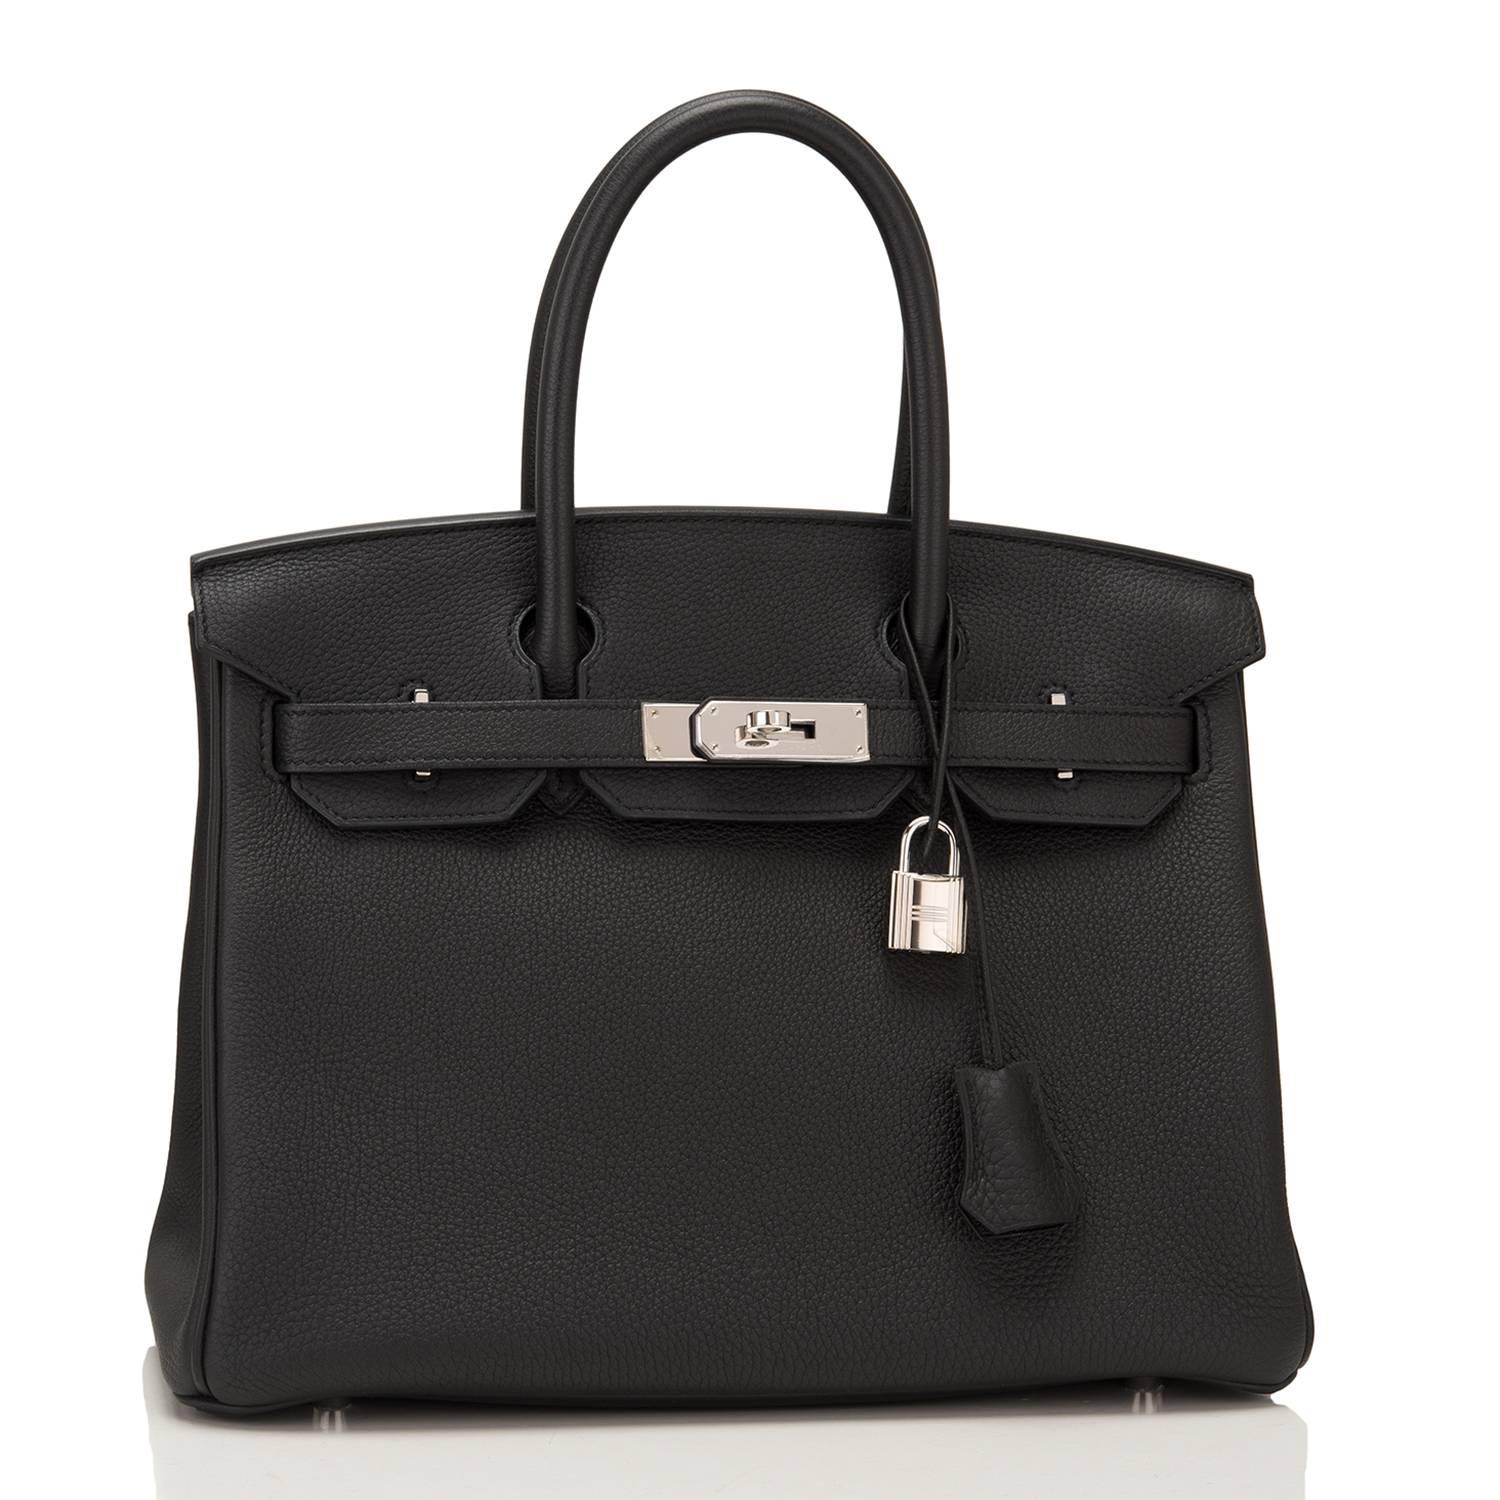 Hermes Black Birkin 30cm of togo leather with palladium hardware.

This Birkin features tonal stitching, a front toggle closure, a clochette with lock and two keys, and double rolled handles.

The interior is lined with black chevre and has one